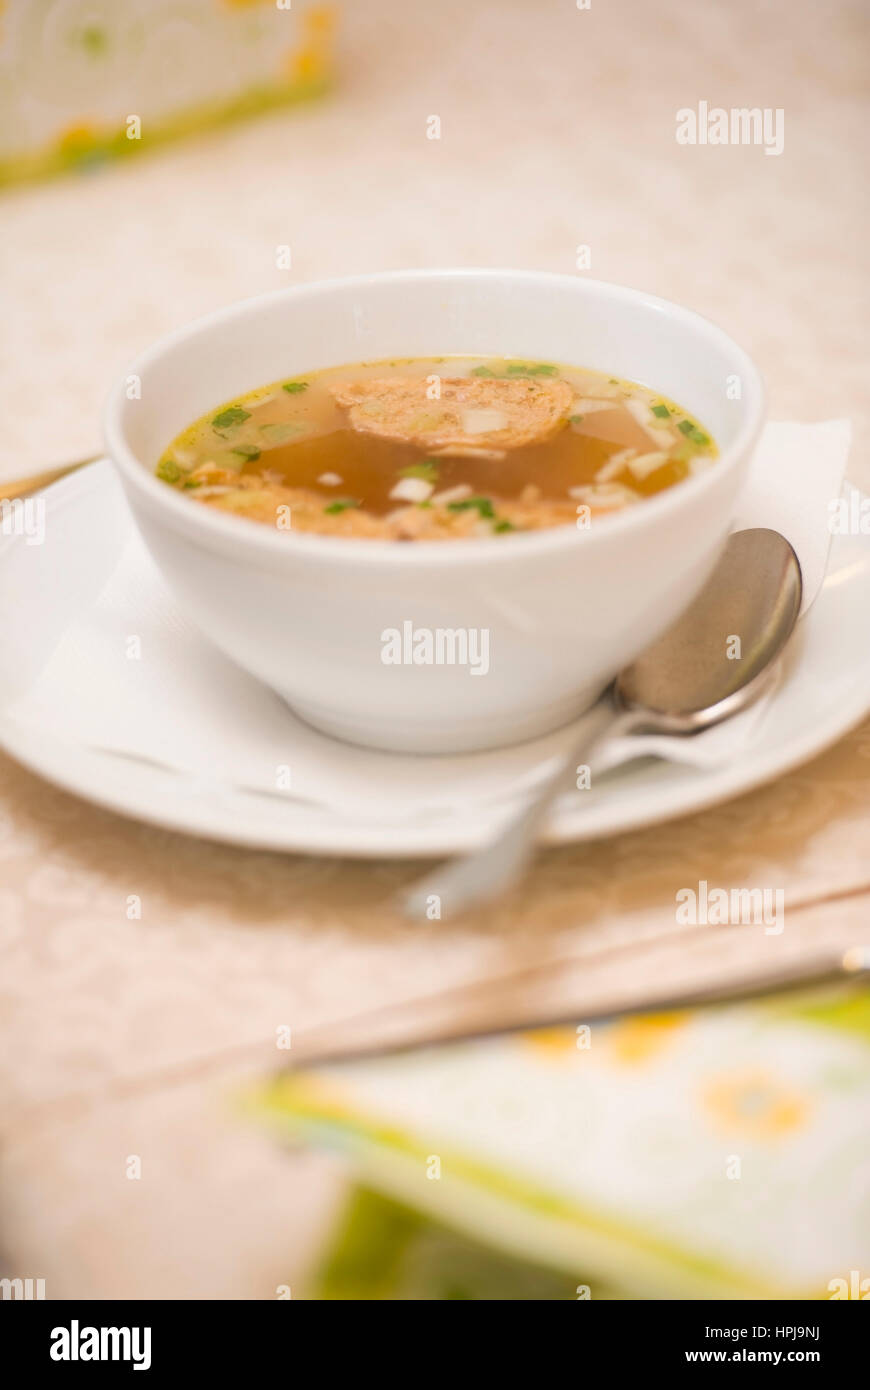 Suppe - Suppe Stockfoto